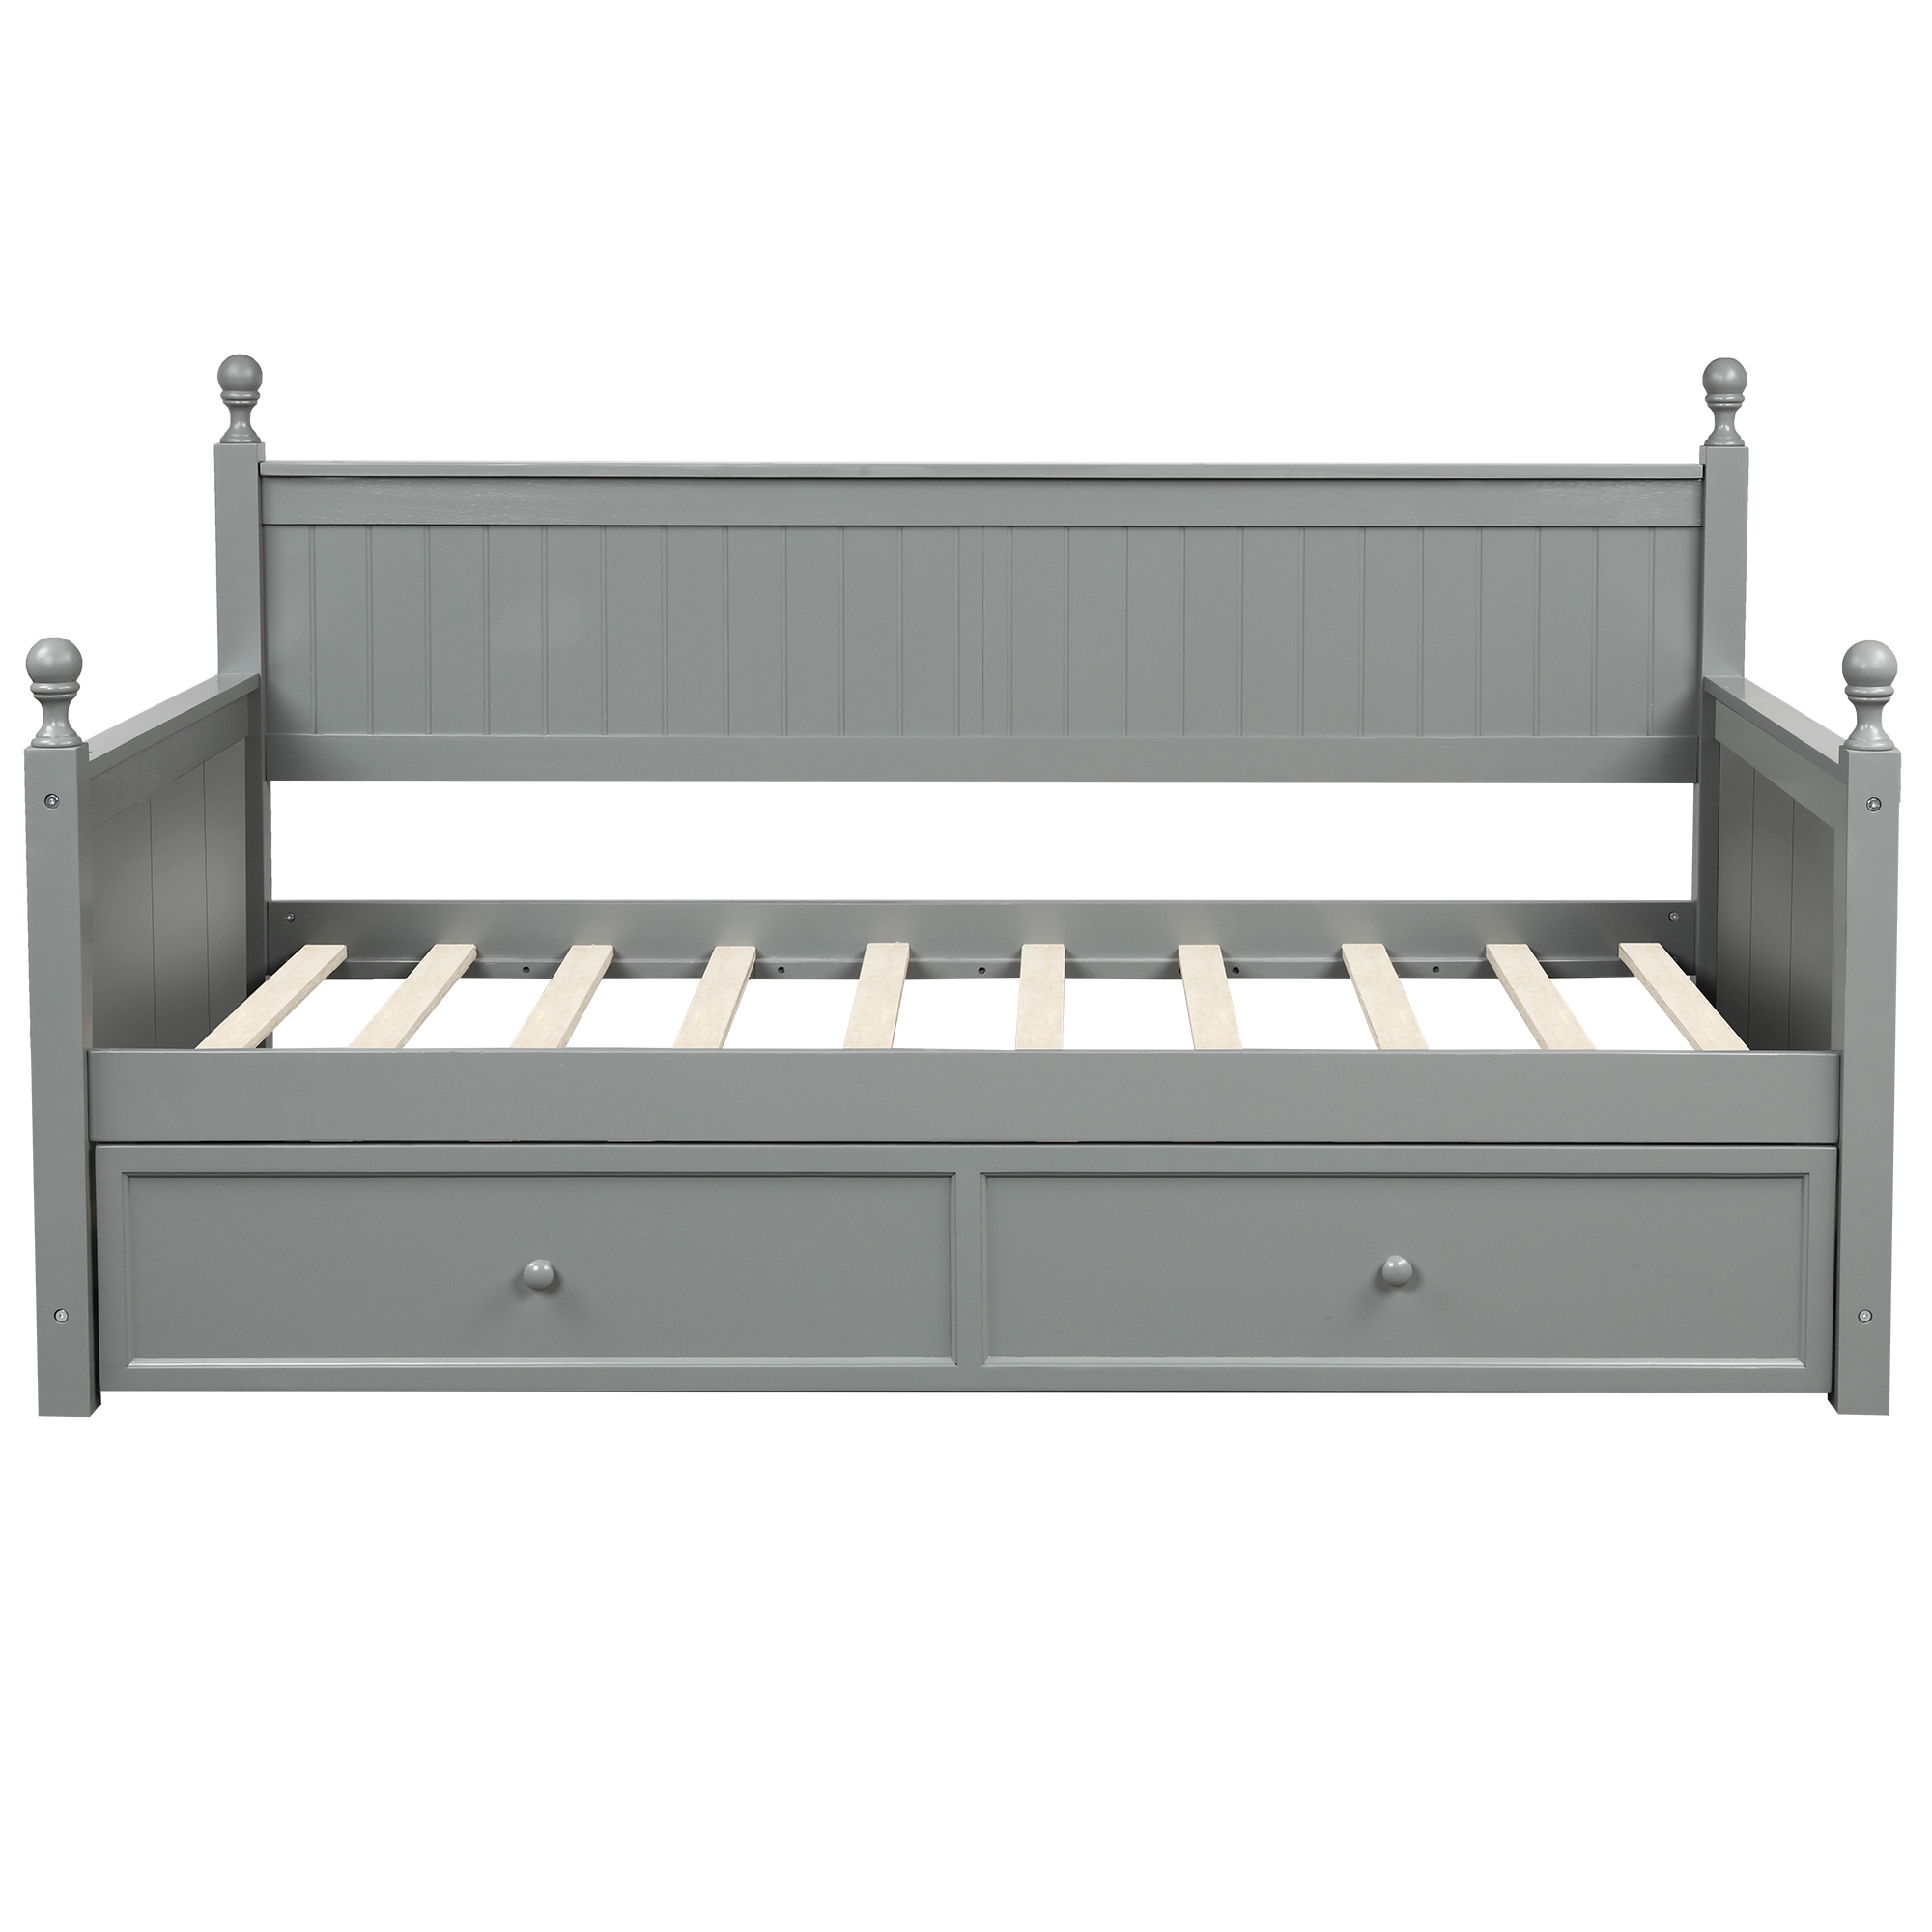 Kepooman Twin Size Modern Wooden Daybed Frame with Twin Size Trundle & Headboard for Bedroom Dorm, 80.5" x 42.1" x 45.41", Gray - image 3 of 14